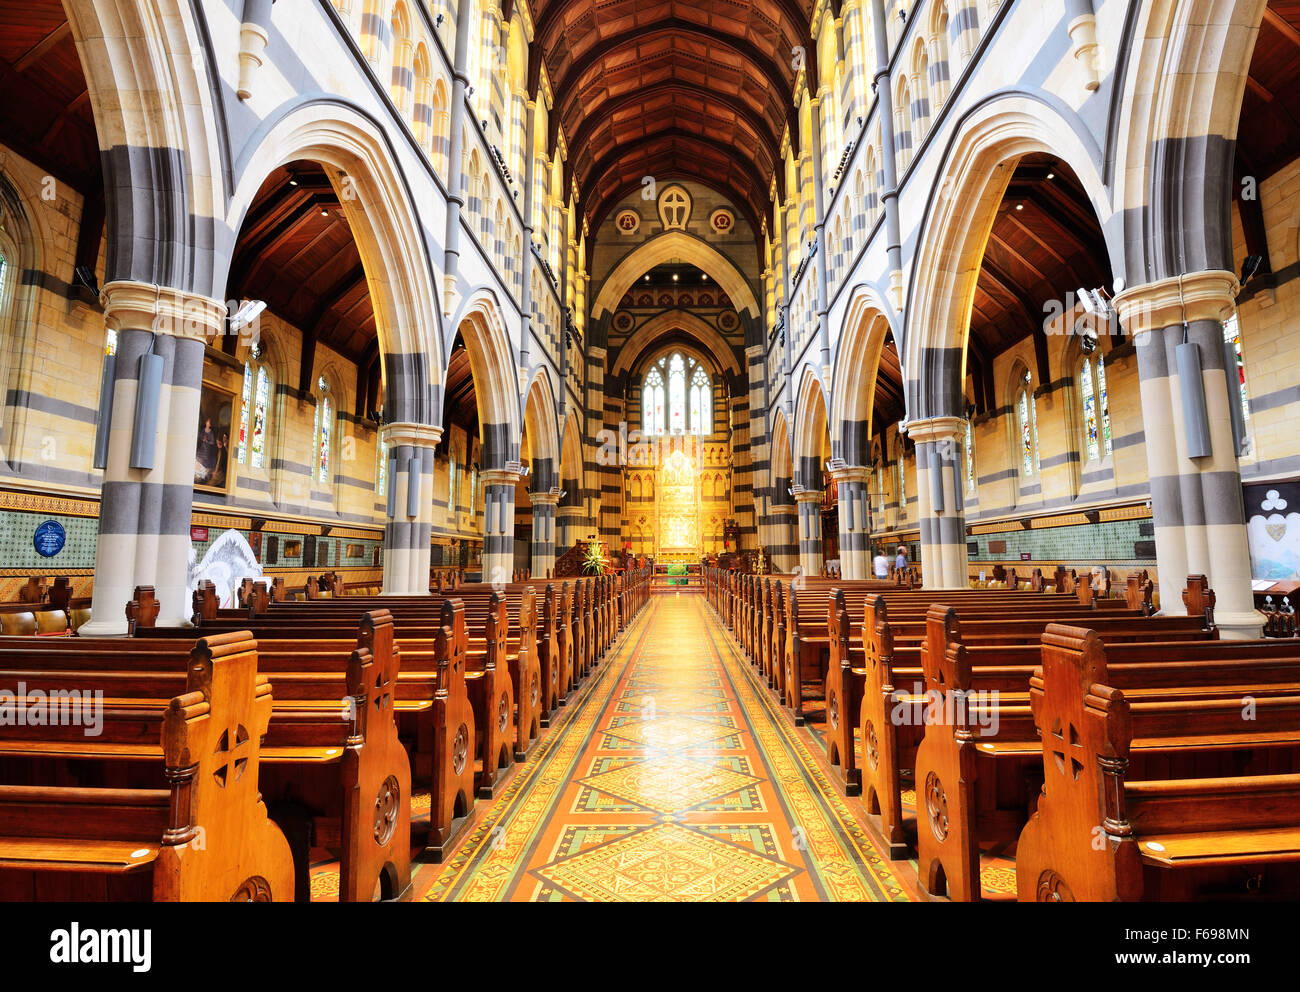 Interior design of St Paul's Cathedral. The cathedral is a major landmark and iconic building in Melbourne, Australia. Stock Photo